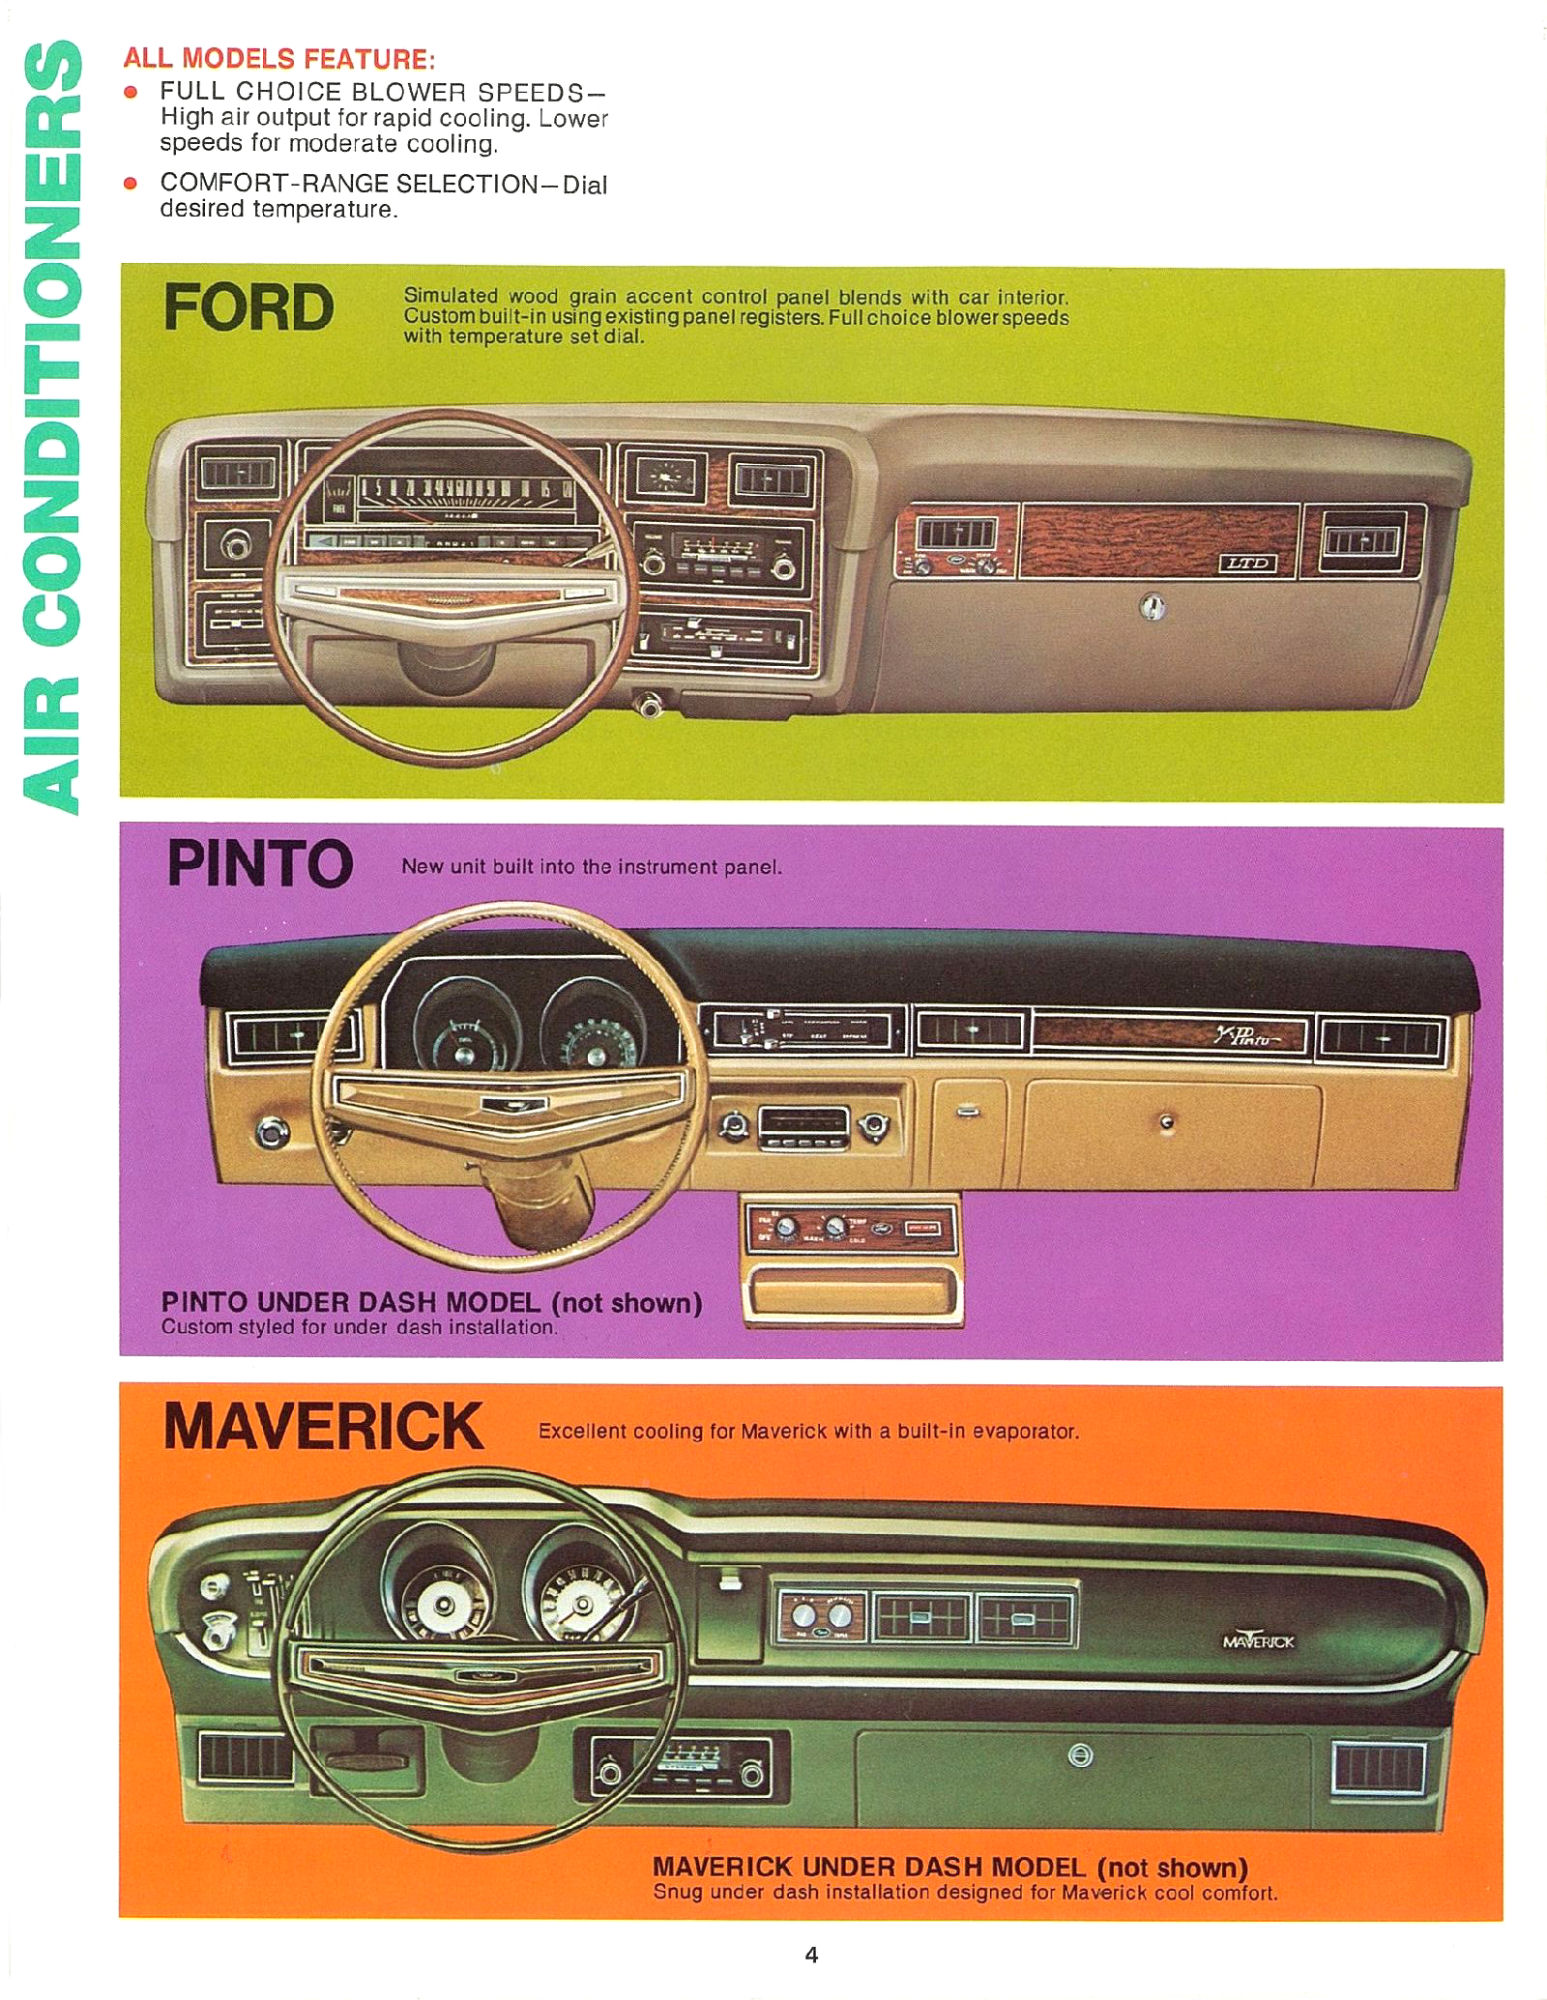 1974 Ford Accessories-04